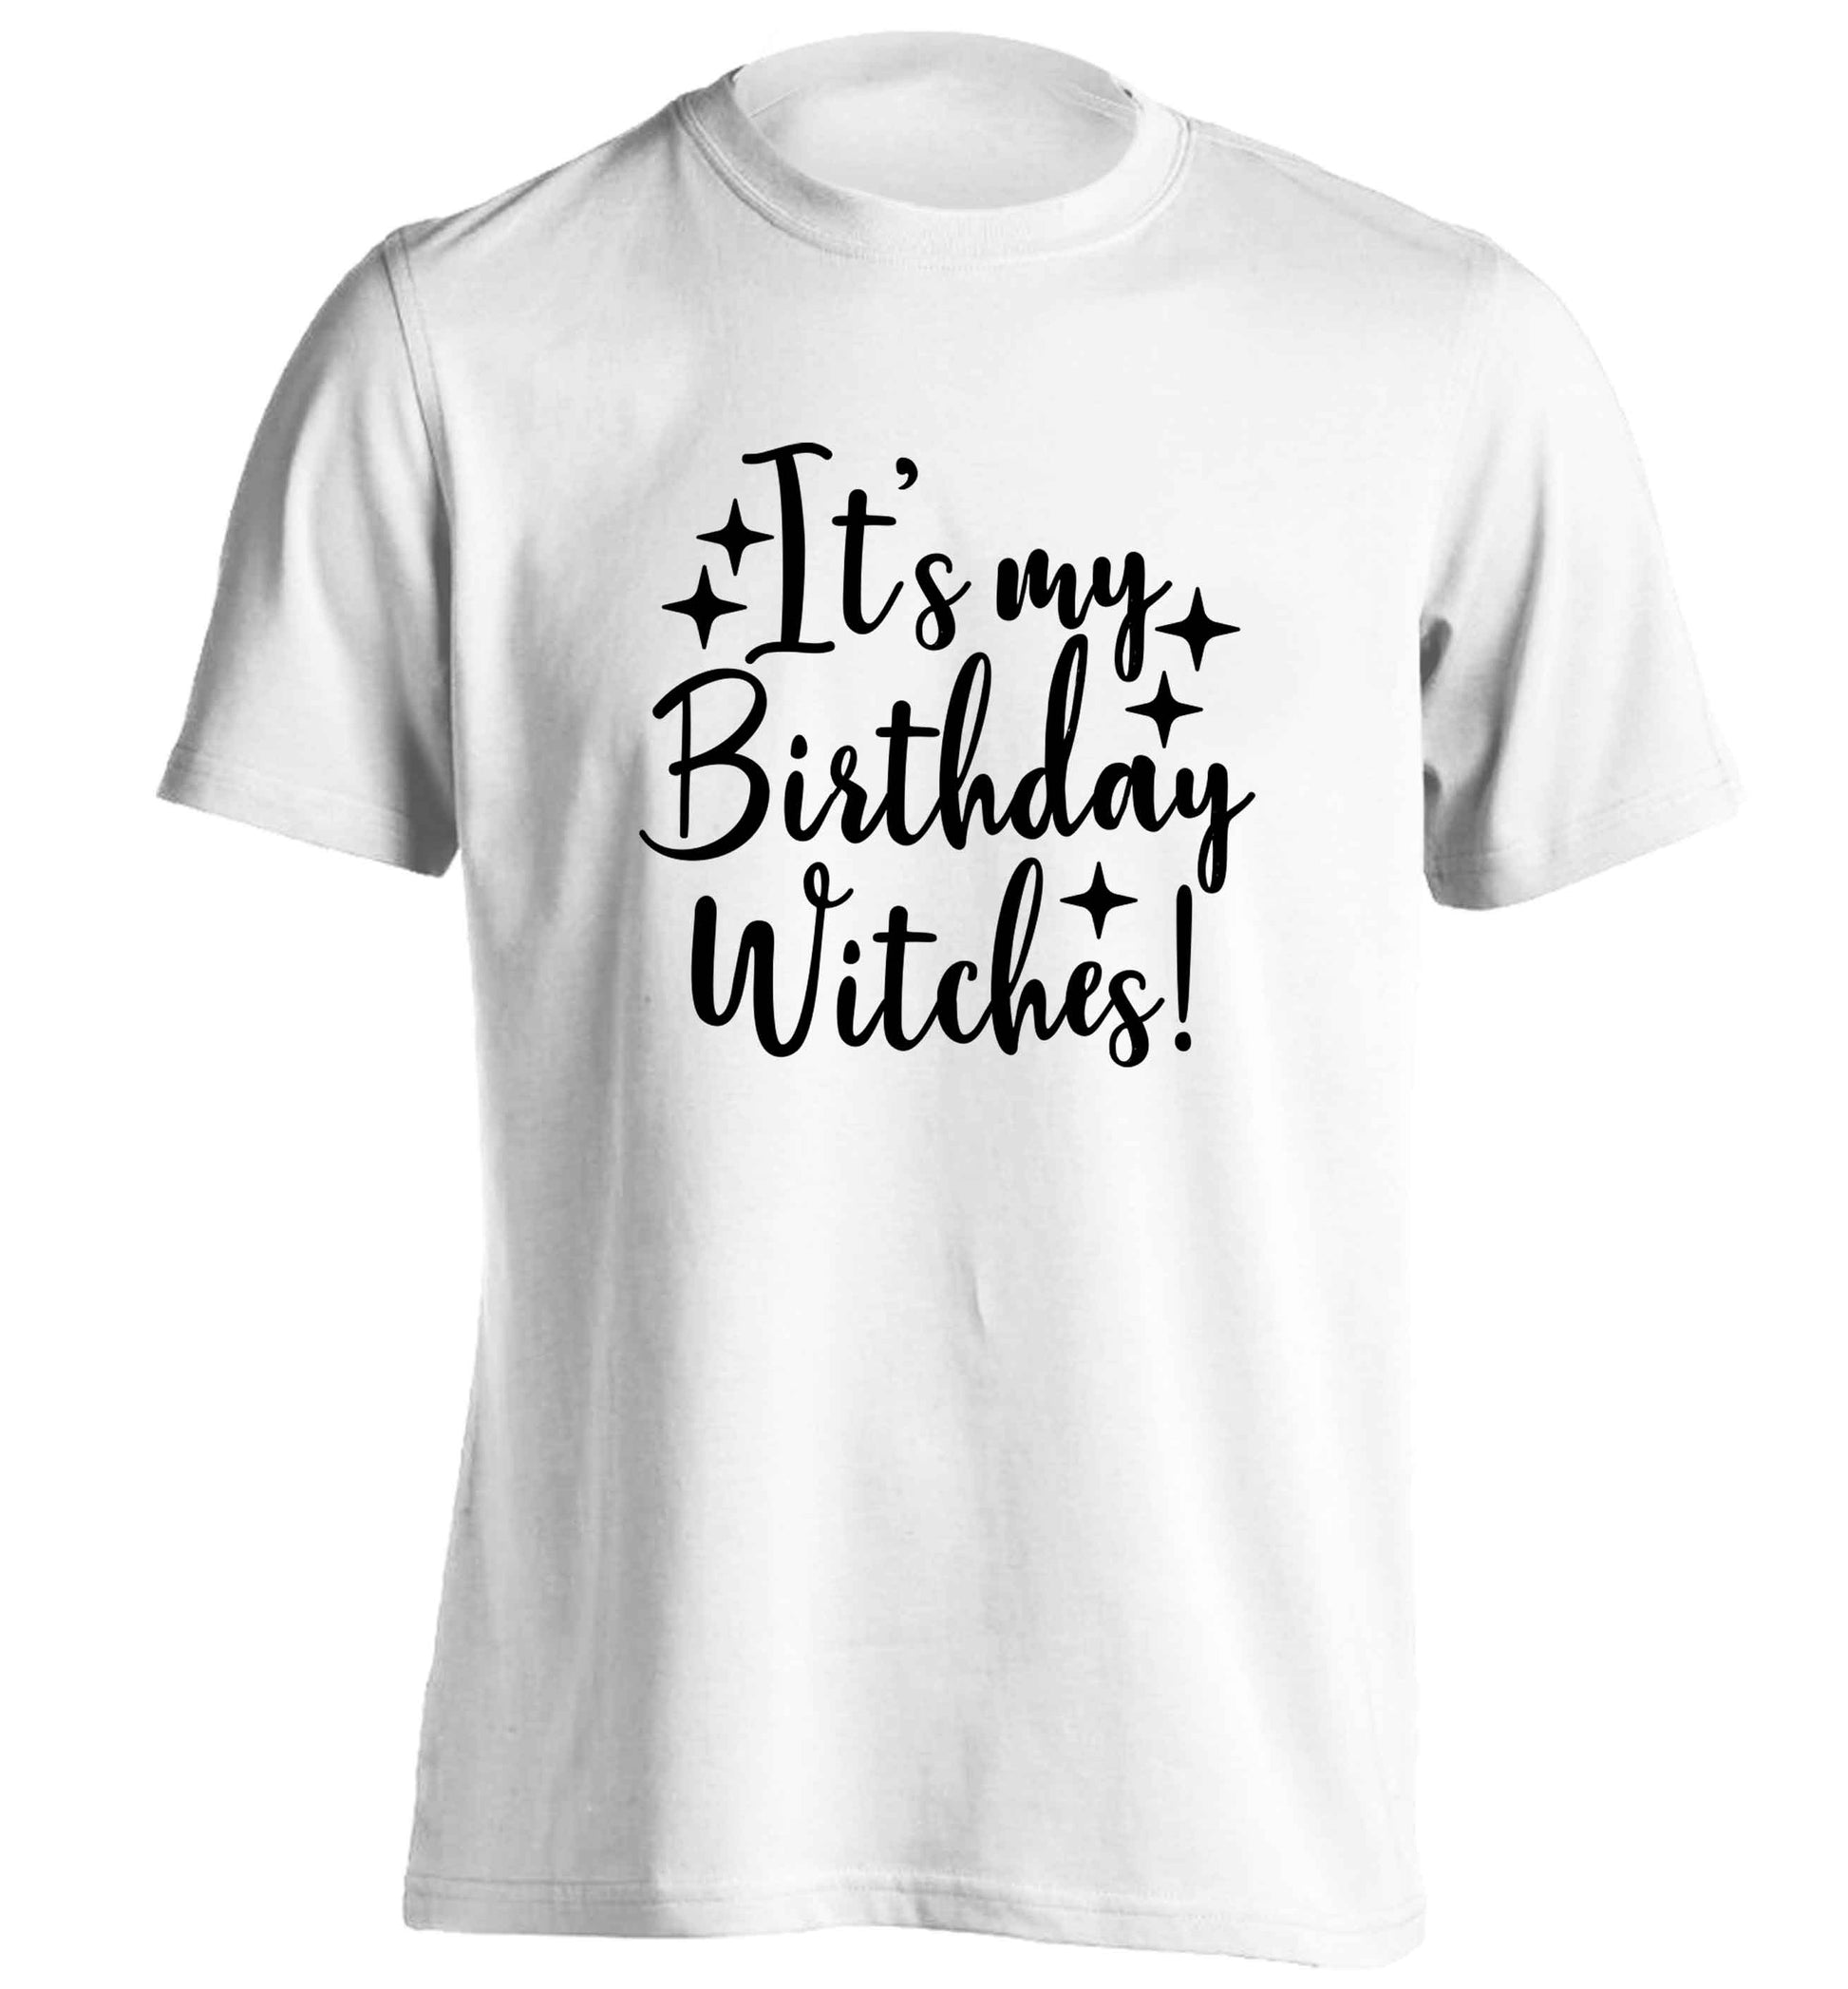 It's my birthday witches!adults unisex white Tshirt 2XL